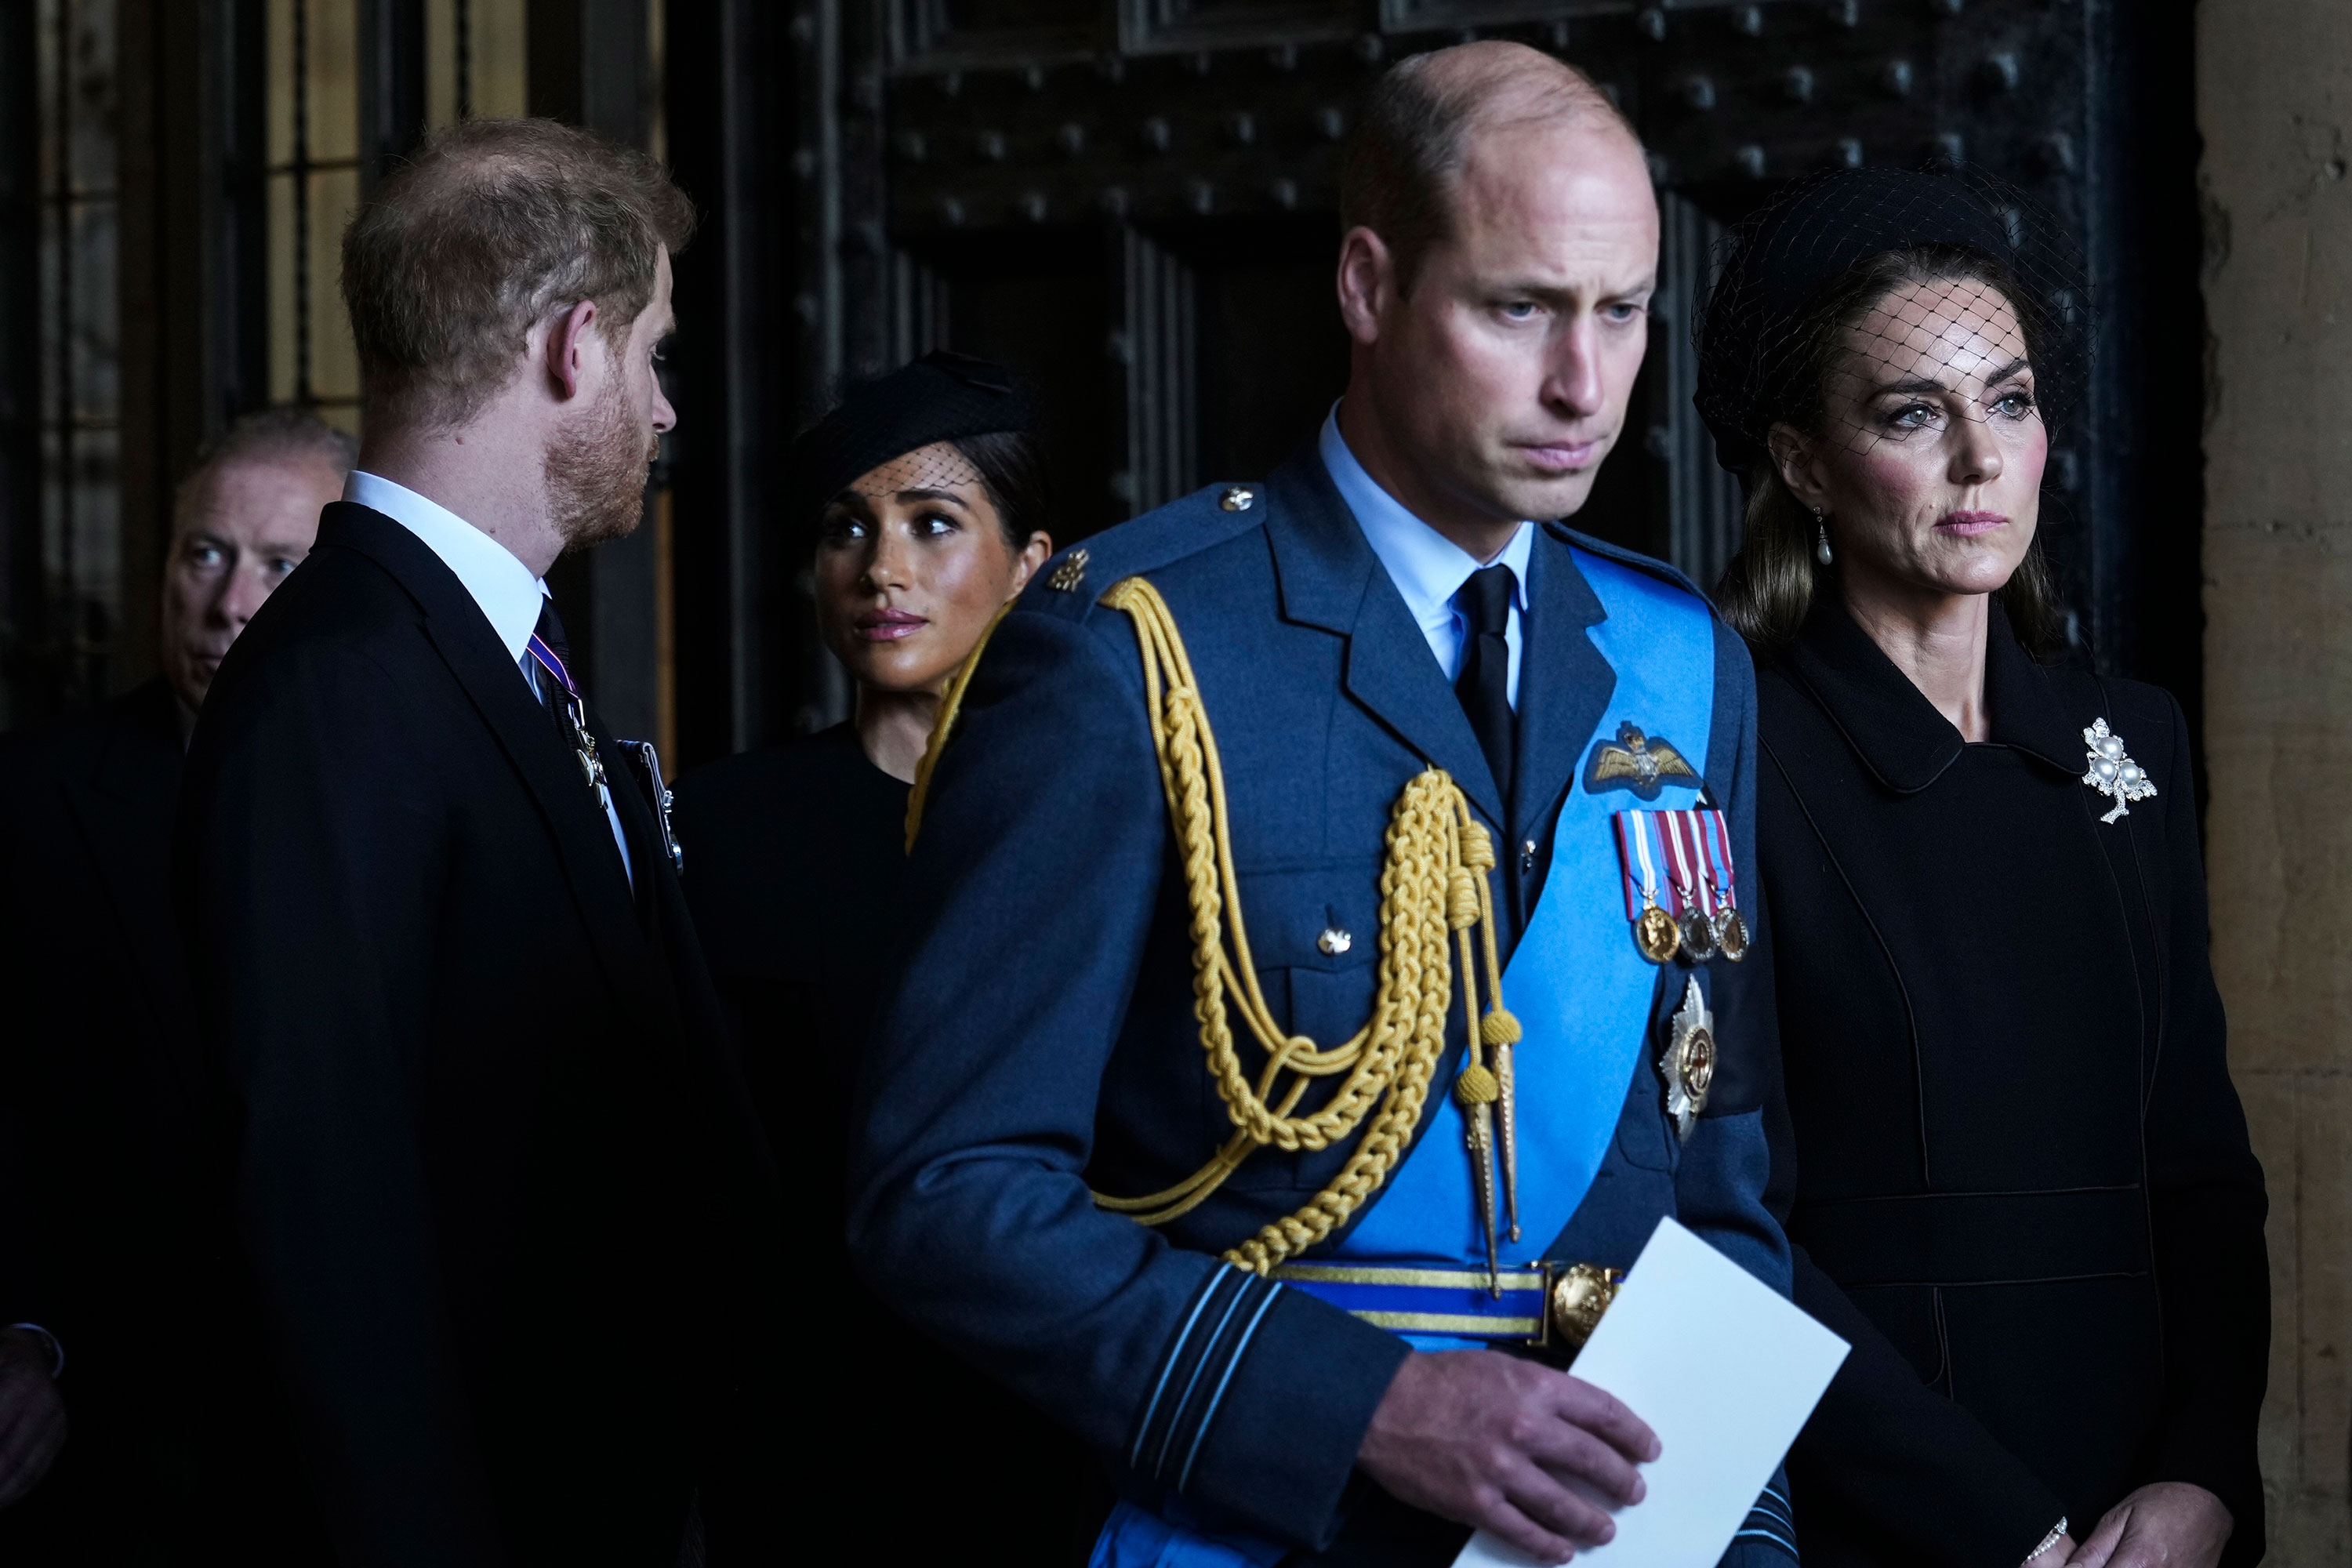 Prince Harry and Meghan, the Duchess of Sussex, walk behind William and Kate as they leave Westminster Hall in London, where the coffin of Queen Elizabeth II was lying in state in 2022. 